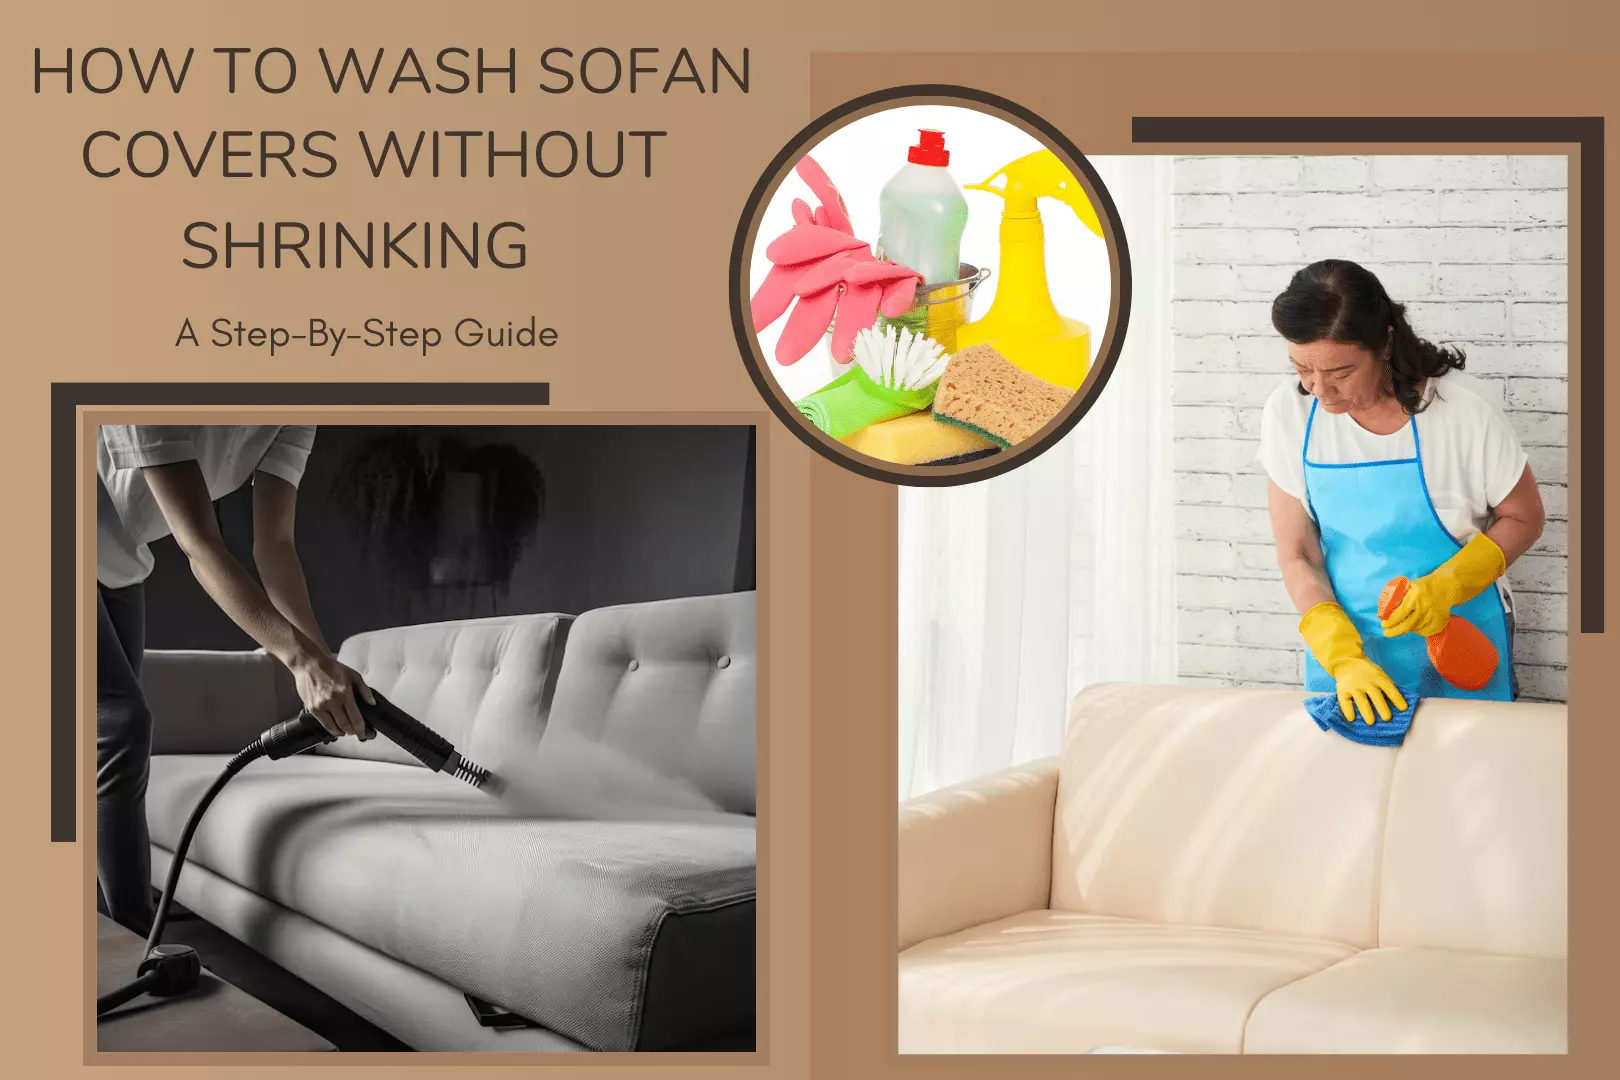 How to Wash Sofa Covers Without Shrinking A Step-By-Step Guide